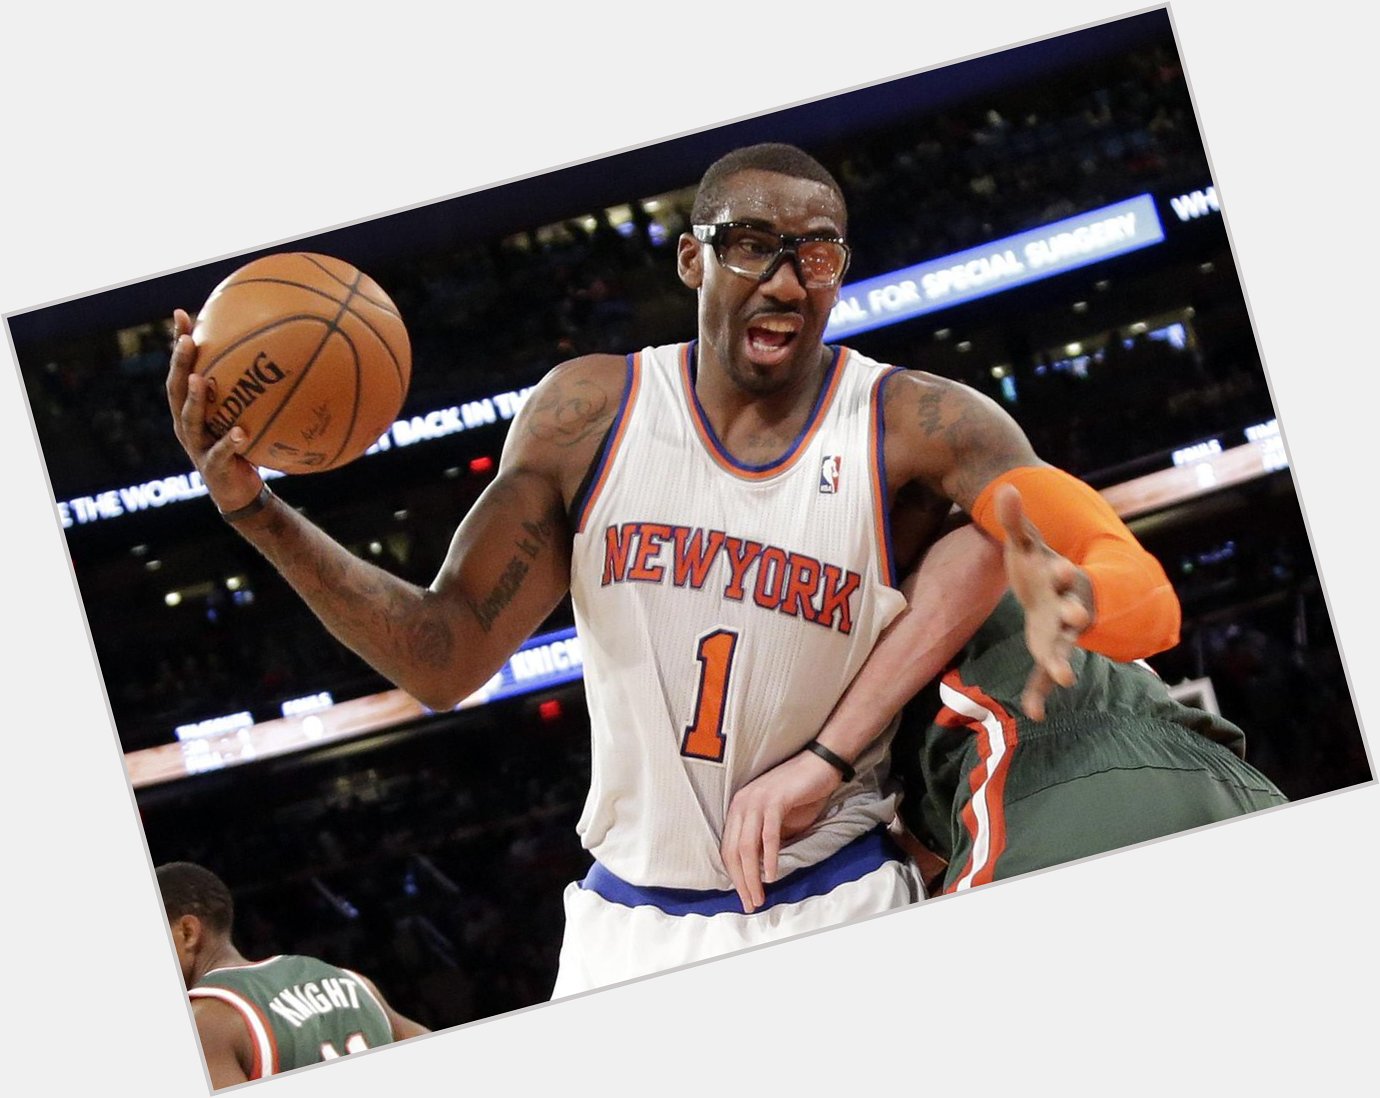 Happy Birthday to Amare Stoudemire, who turns 32 today! 